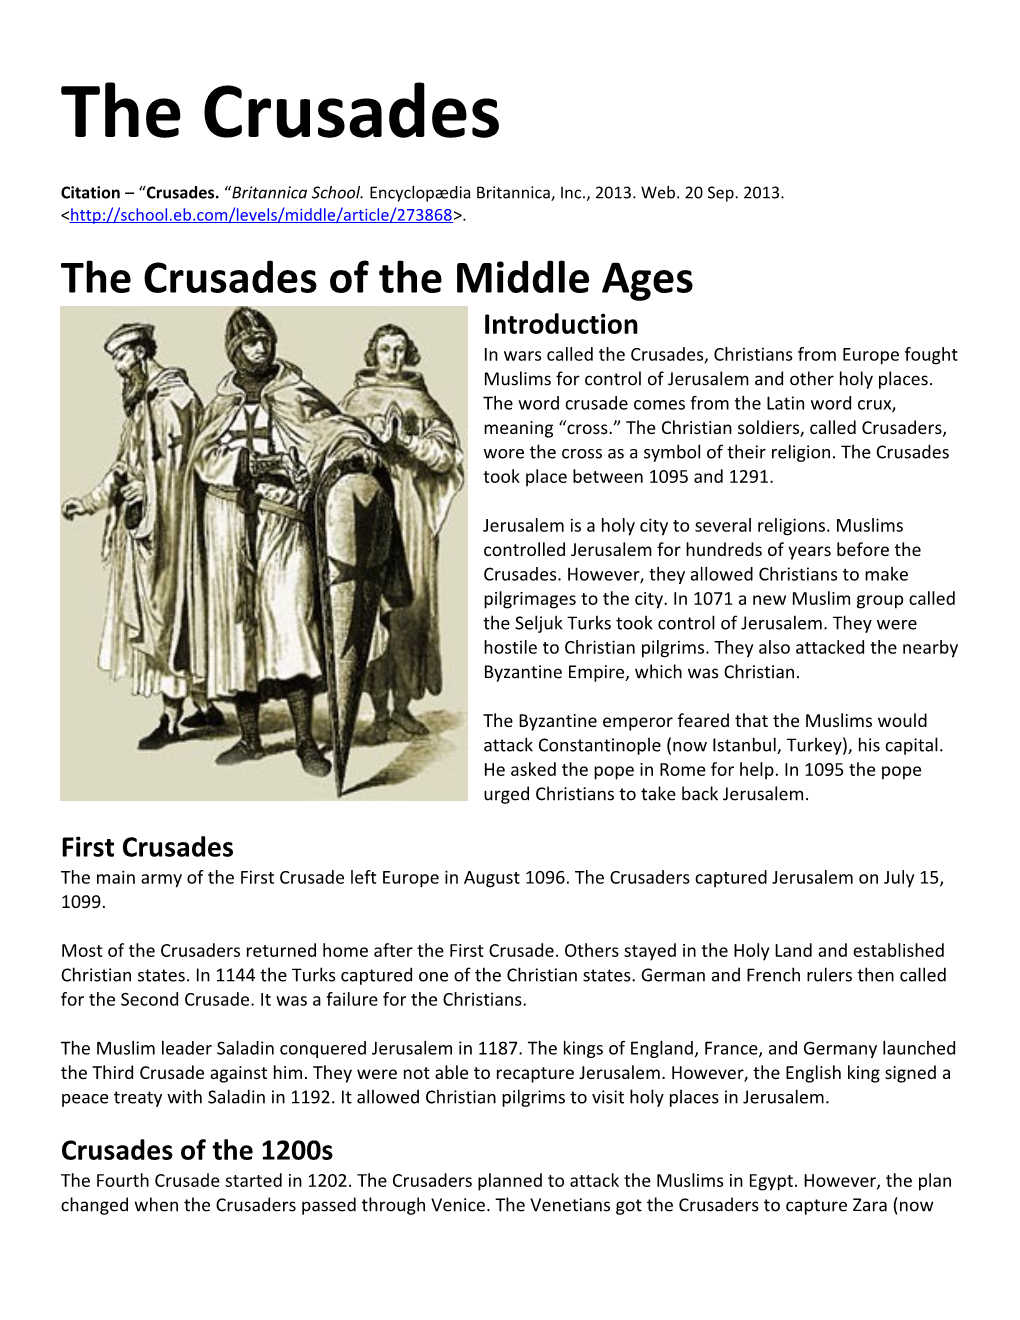 The Crusades of the Middle Ages